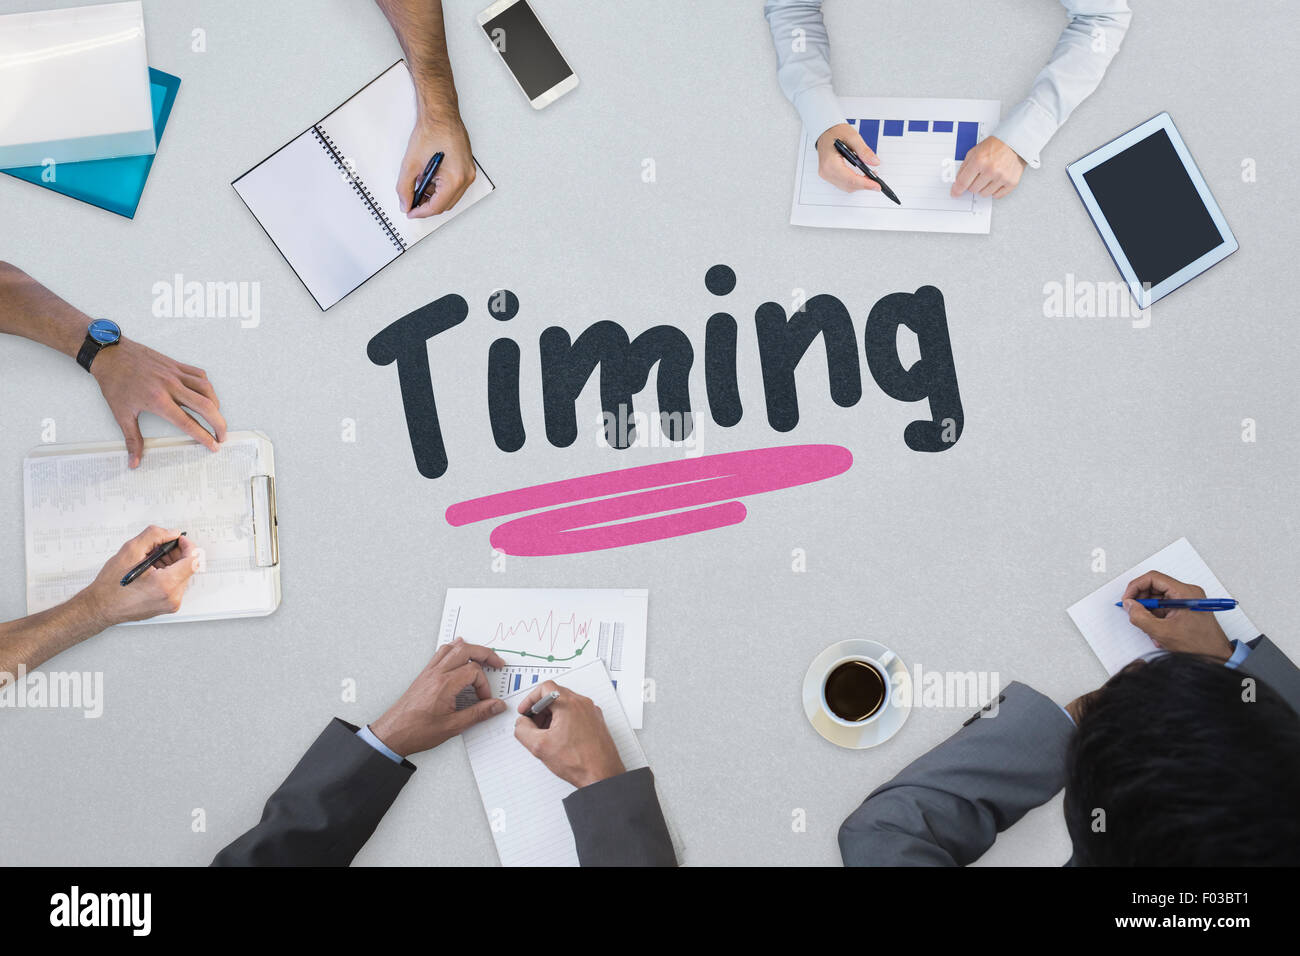 Timing against business meeting Stock Photo